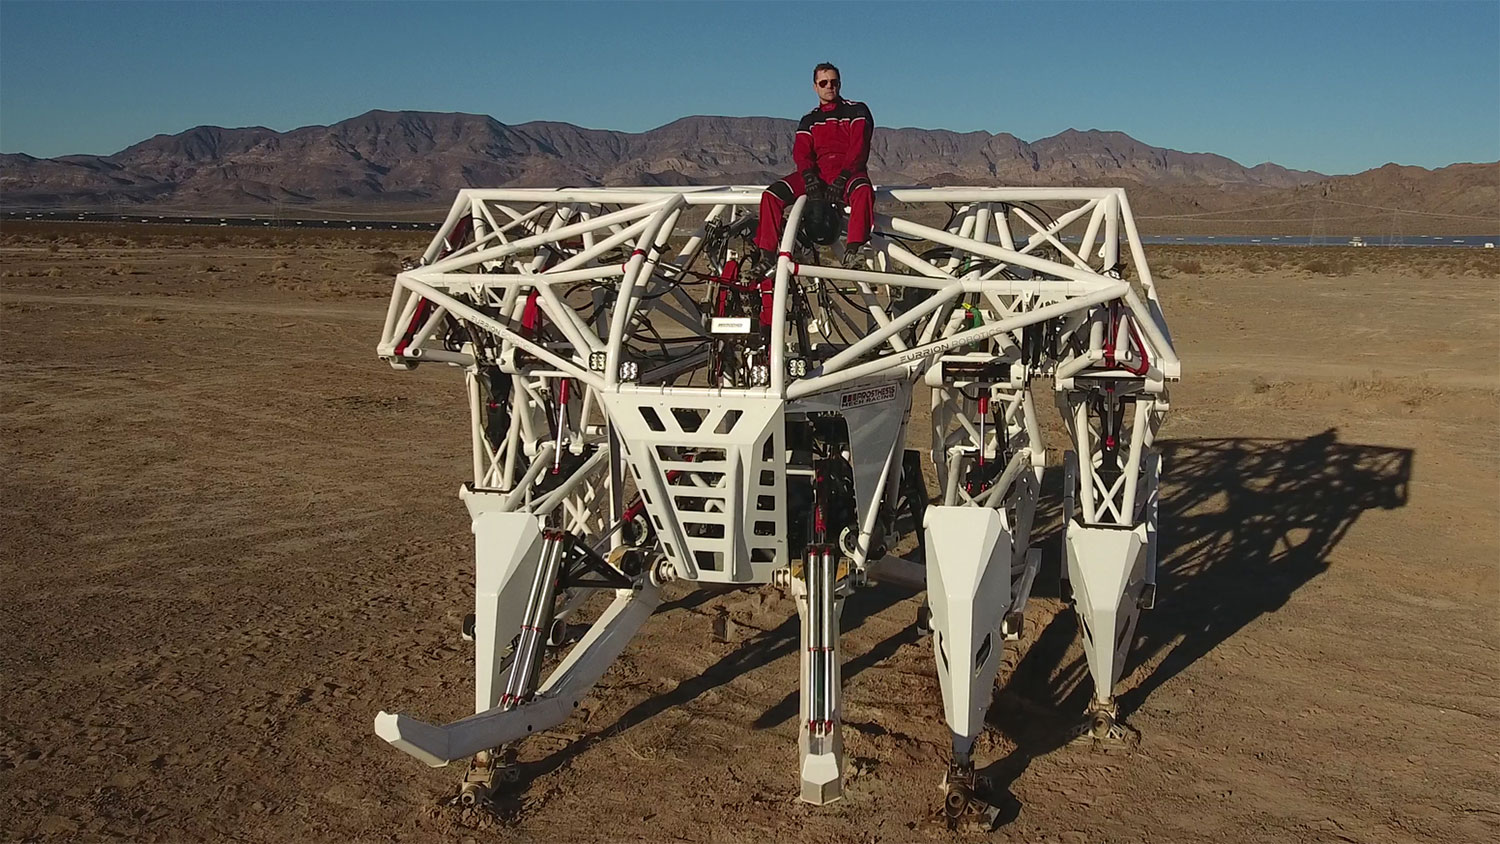 Prosthesis, a giant 9,000-pound mech suit that you can pilot.